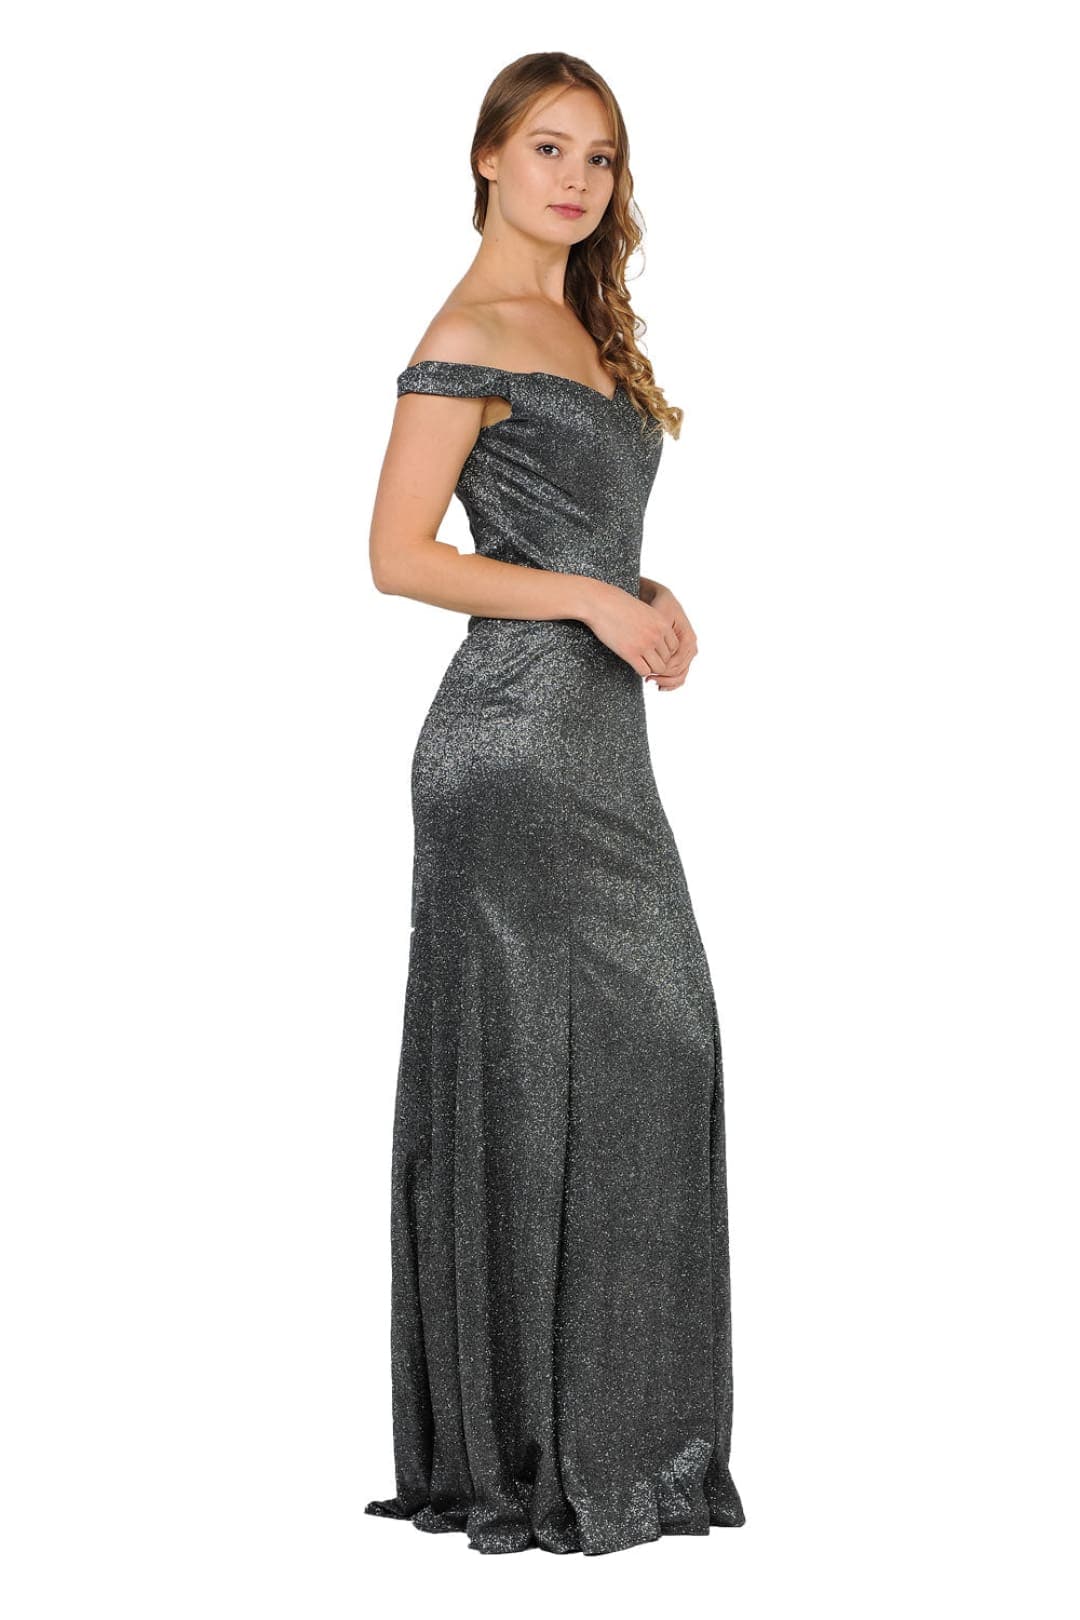 Mermaid Prom Evening Gown - LAY8482